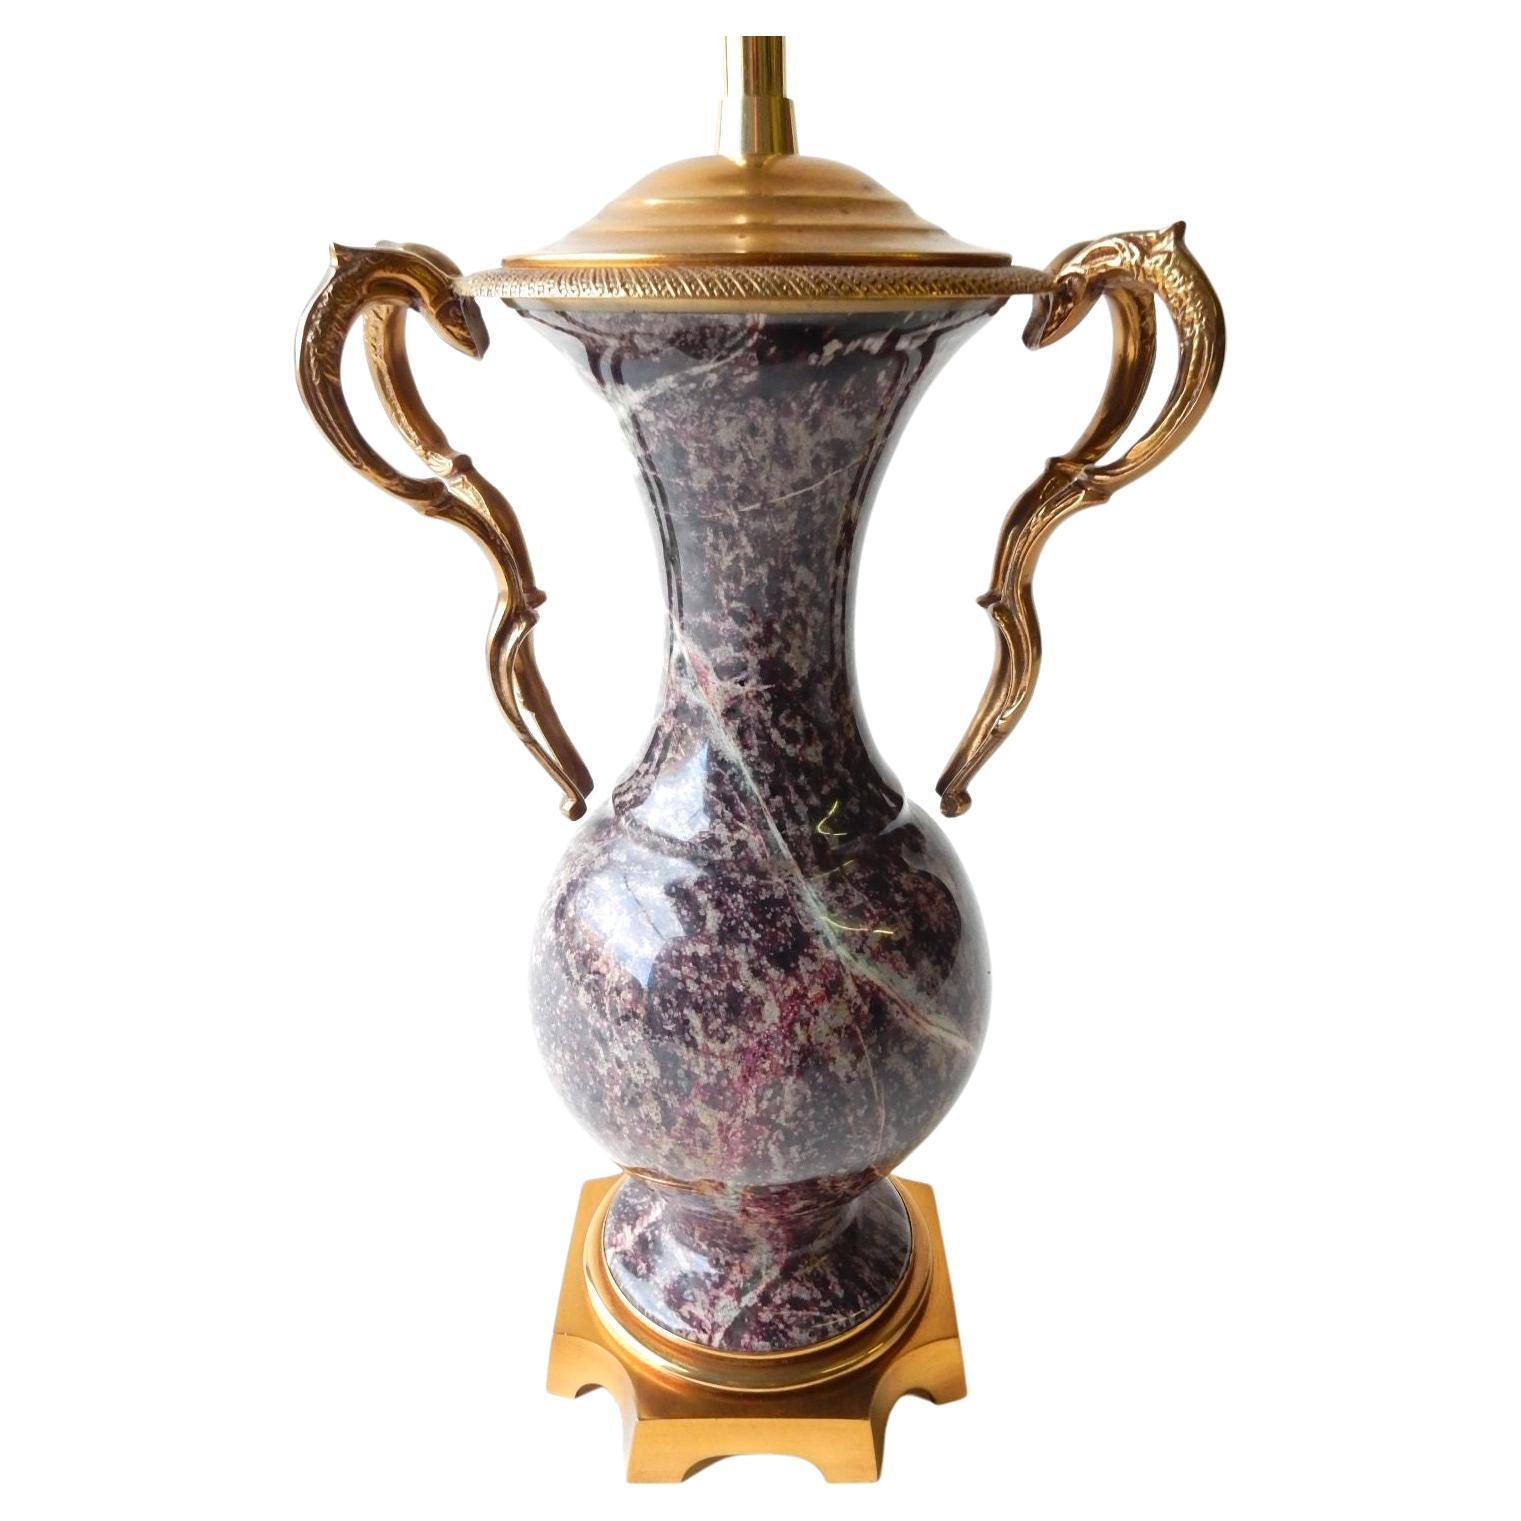 Gorgeous Italian purple marble urn lamp with golden bronze handles, base and hardware.
Made by the artisans of Marbro Lamp CO. No issues or damage.
Very heavy piece, 55 lbs +.

 